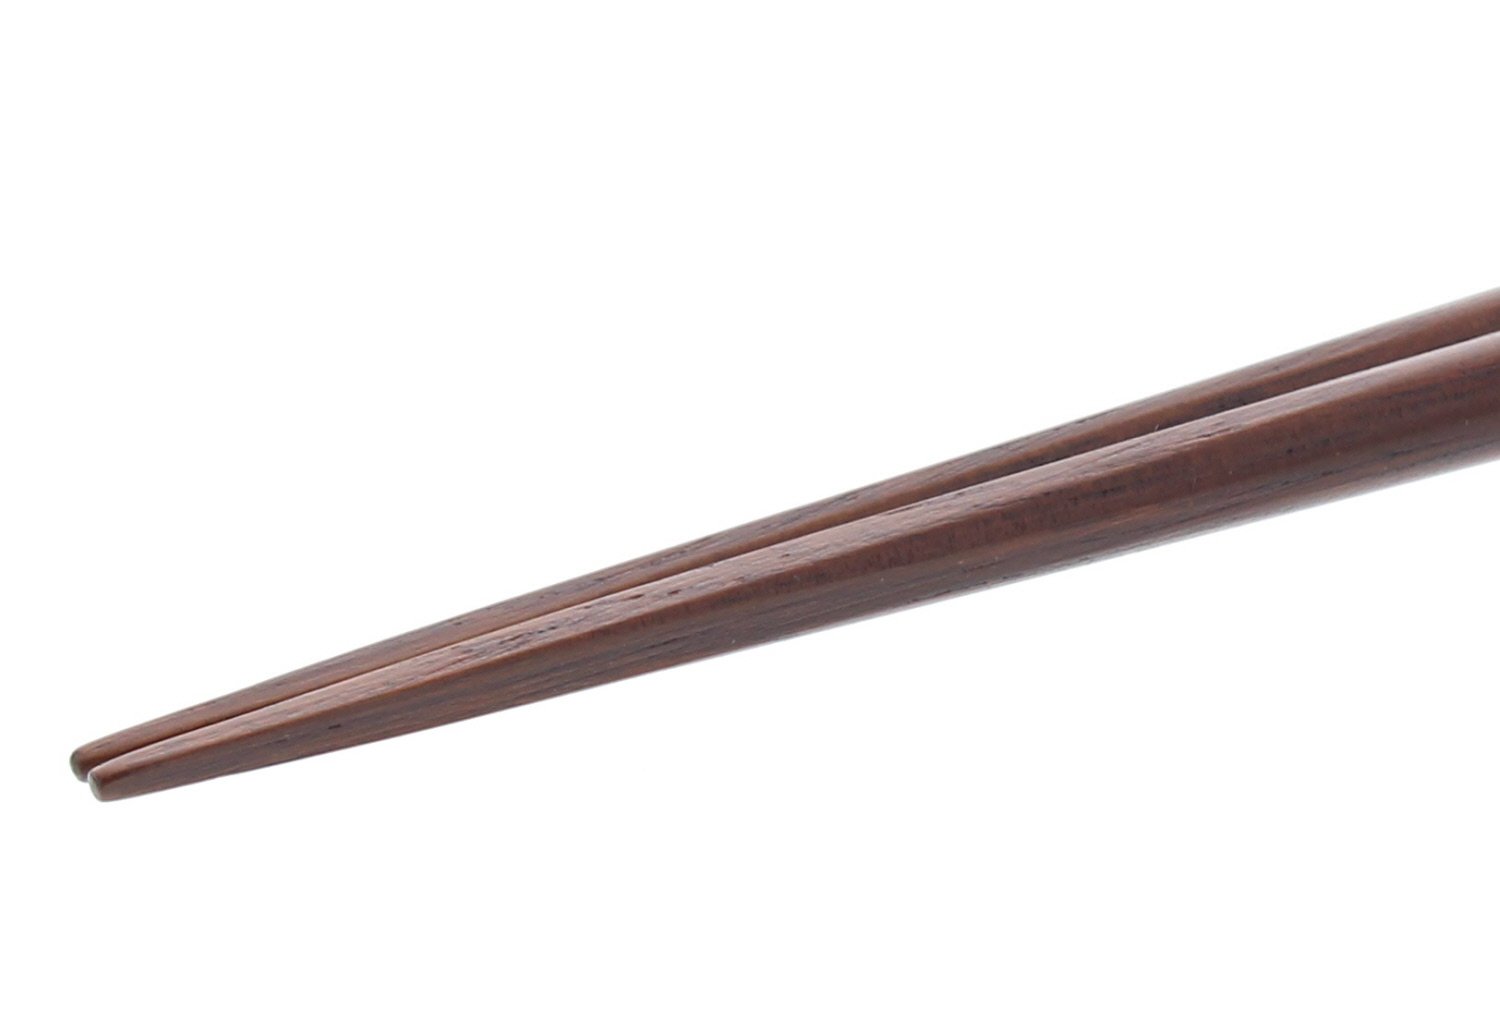 Ishida Chopsticks, Made in Japan, For Men, Thick, Random Carved, 1.5 inches (23.5 cm), Wooden (Natural Wood), Lacquer, Corner Point, 9.3 inches (23.5 cm)